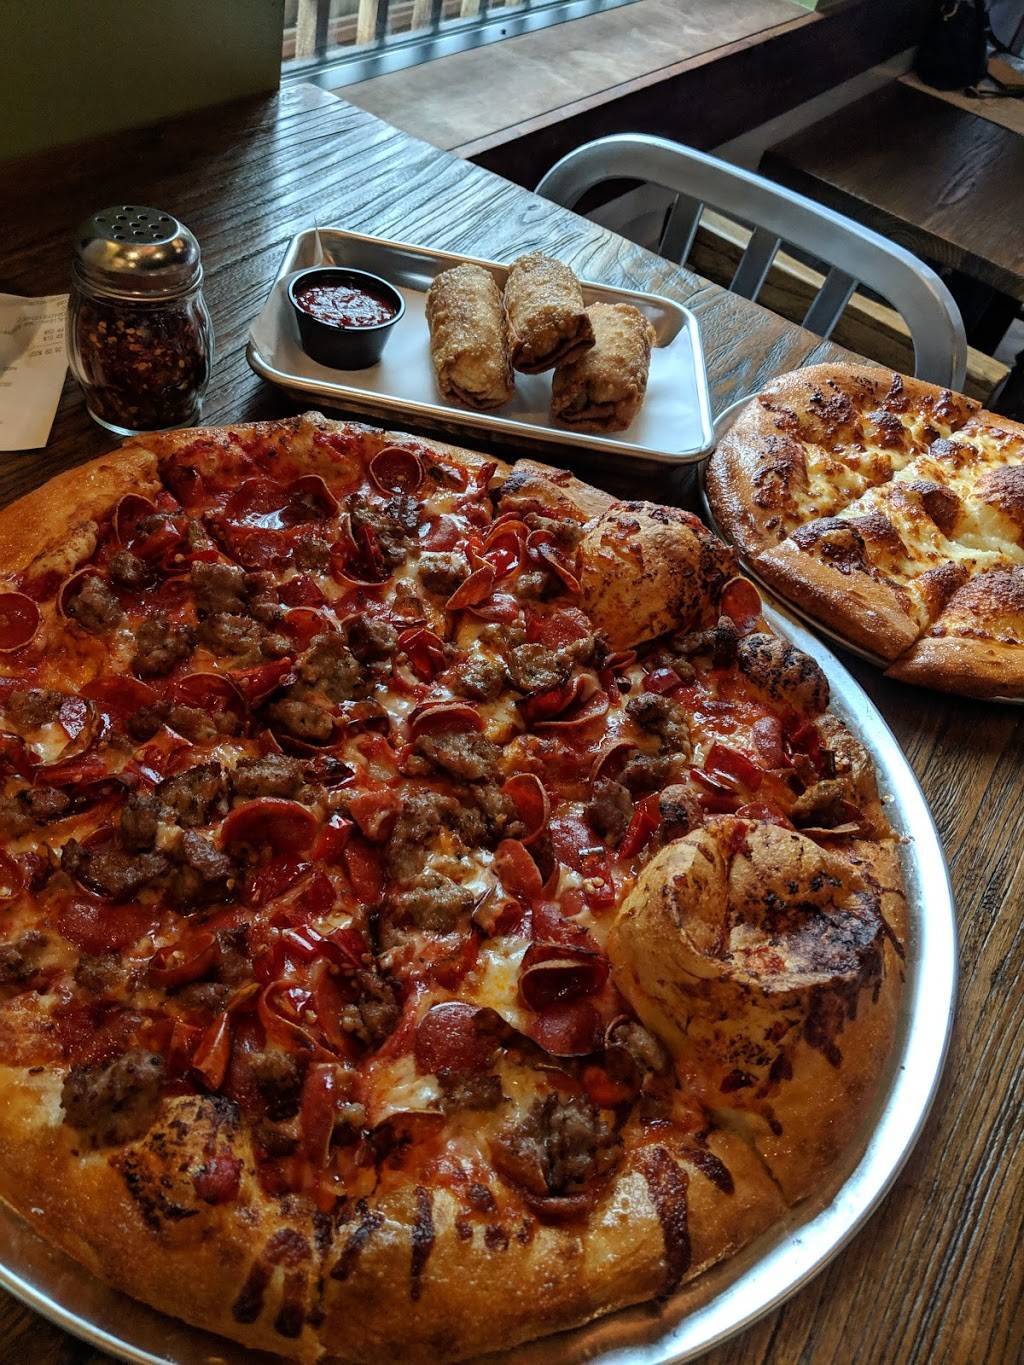 Jtown Pizza Co. | meal delivery | 625 N 6th St, San Jose, CA 95112, USA | 4083262910 OR +1 408-326-2910